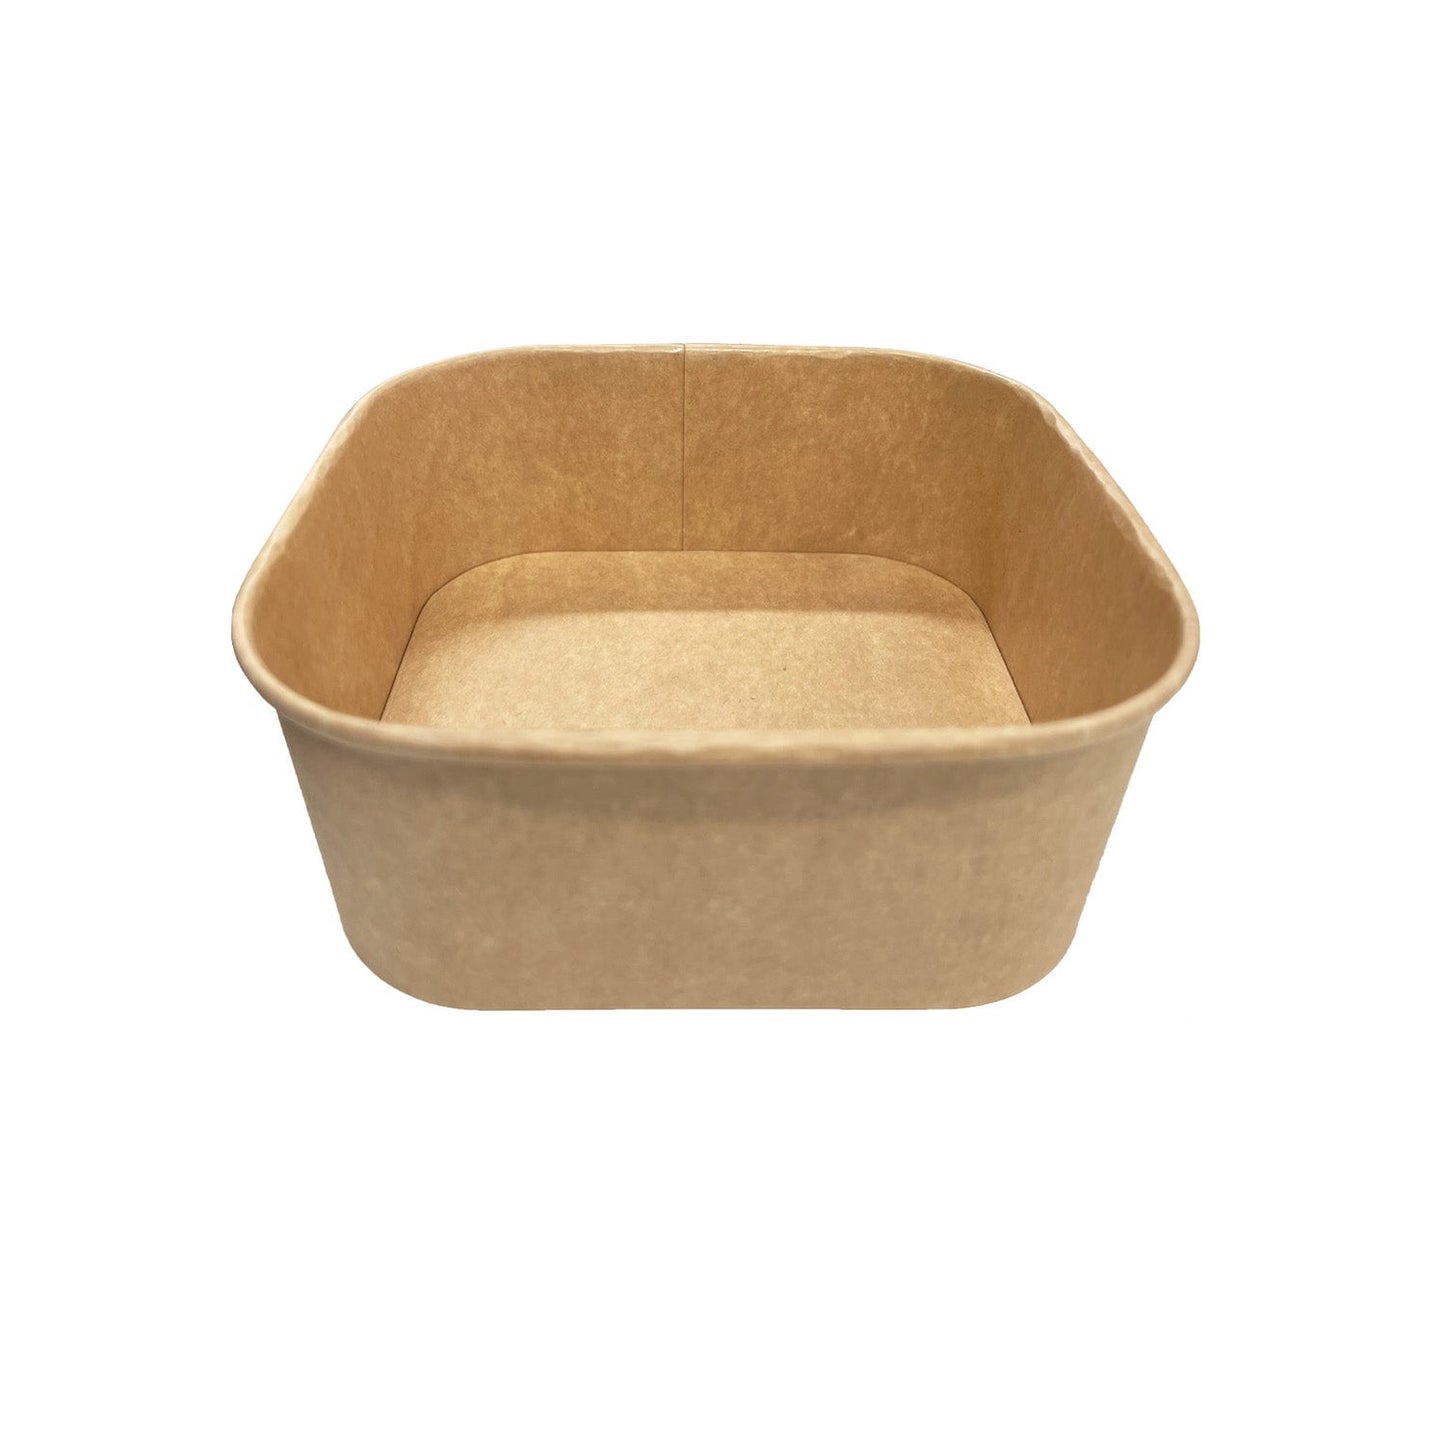 KIS-FC1300S | 44oz, 1300ml Kraft Paper Rectangle Containers Base; From $0.335/pc